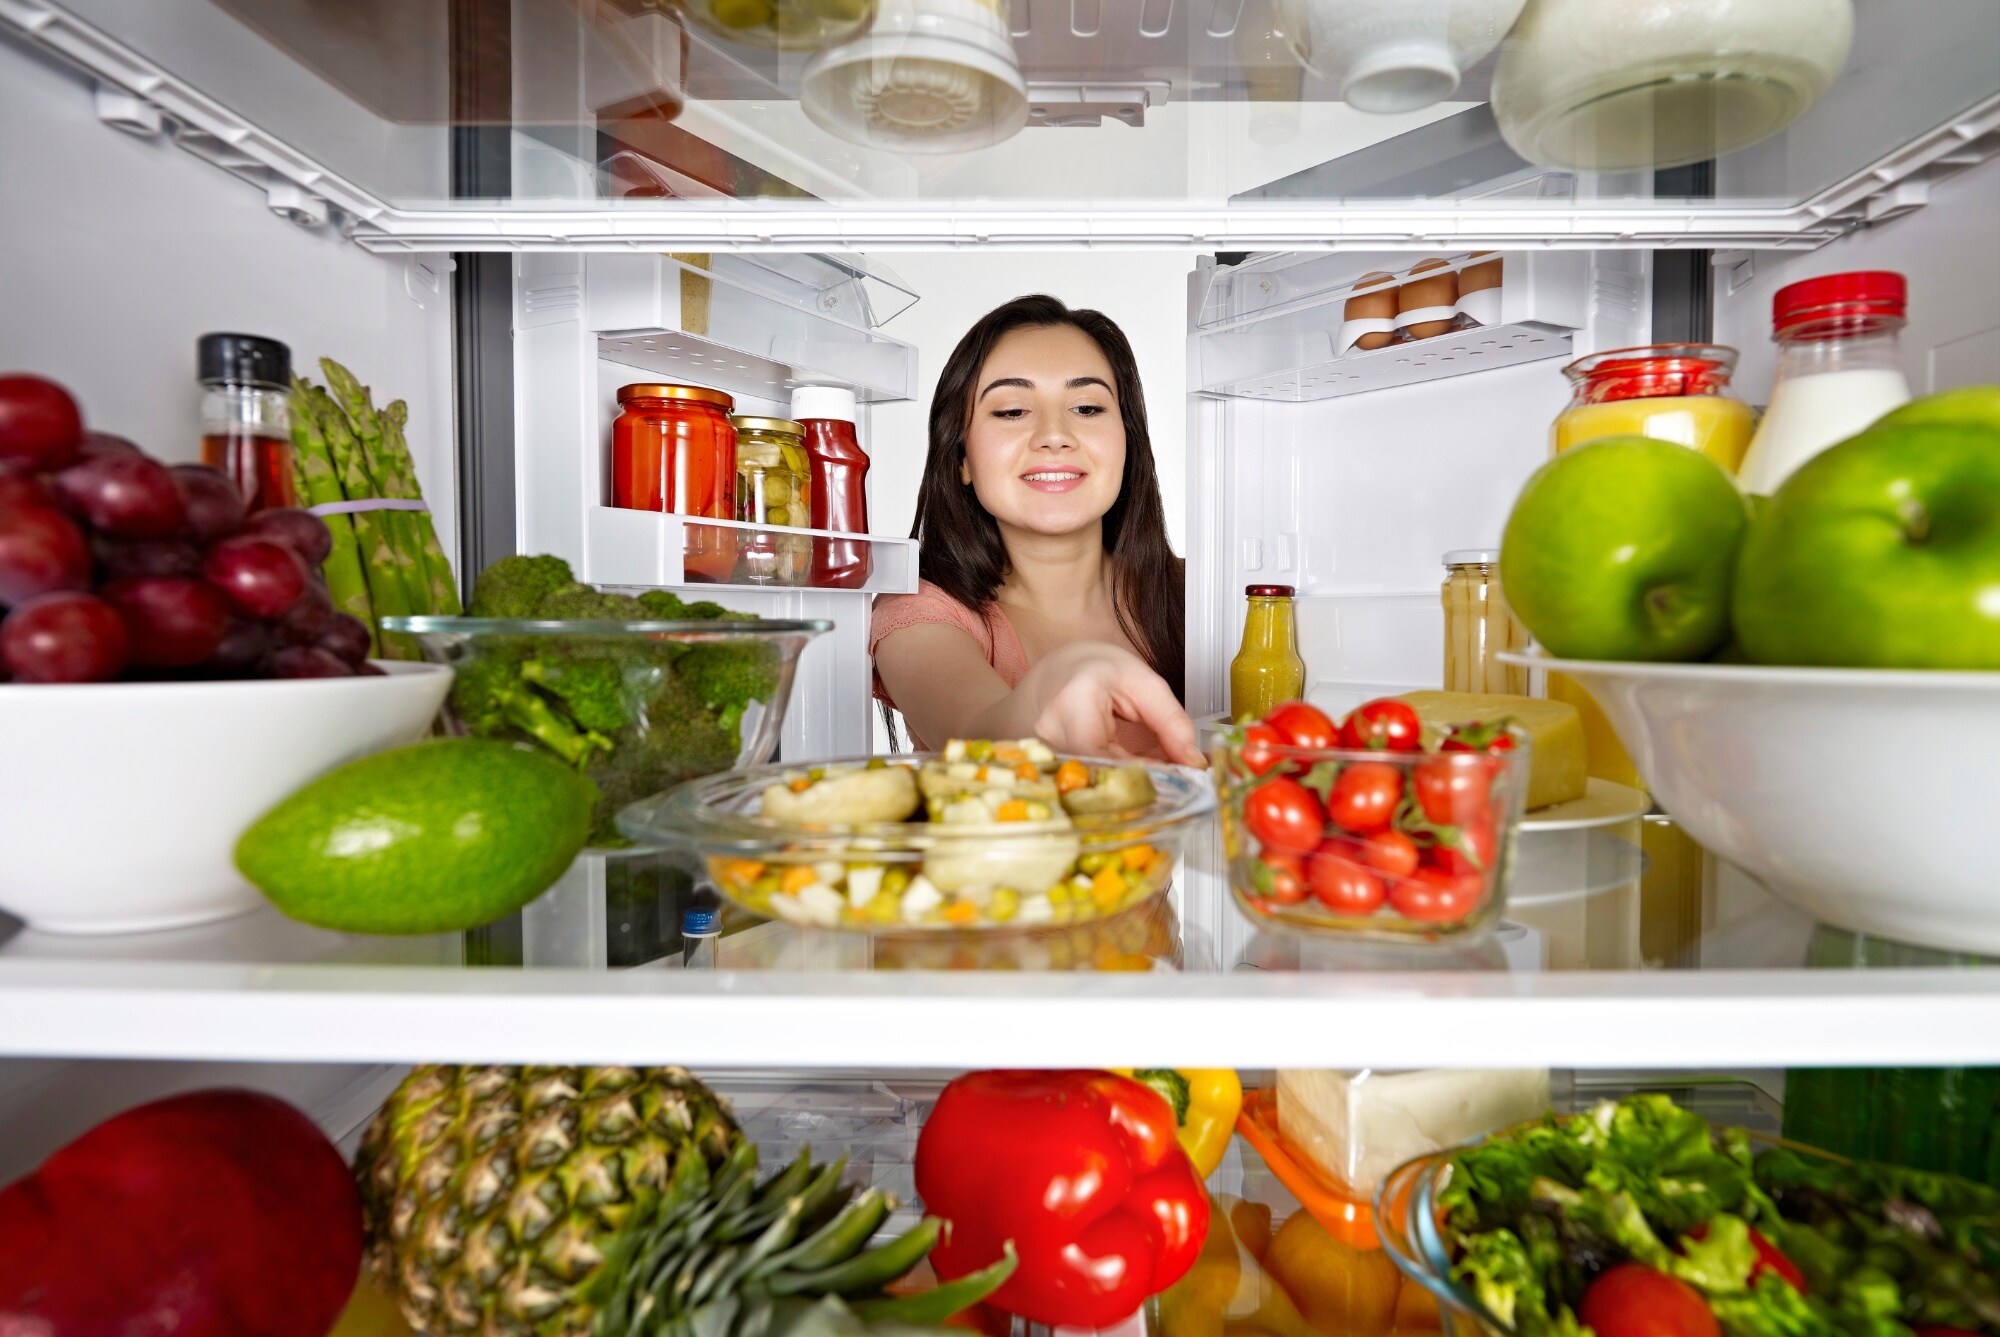 Woman reaching into the refrigerator to select a healthy meal.